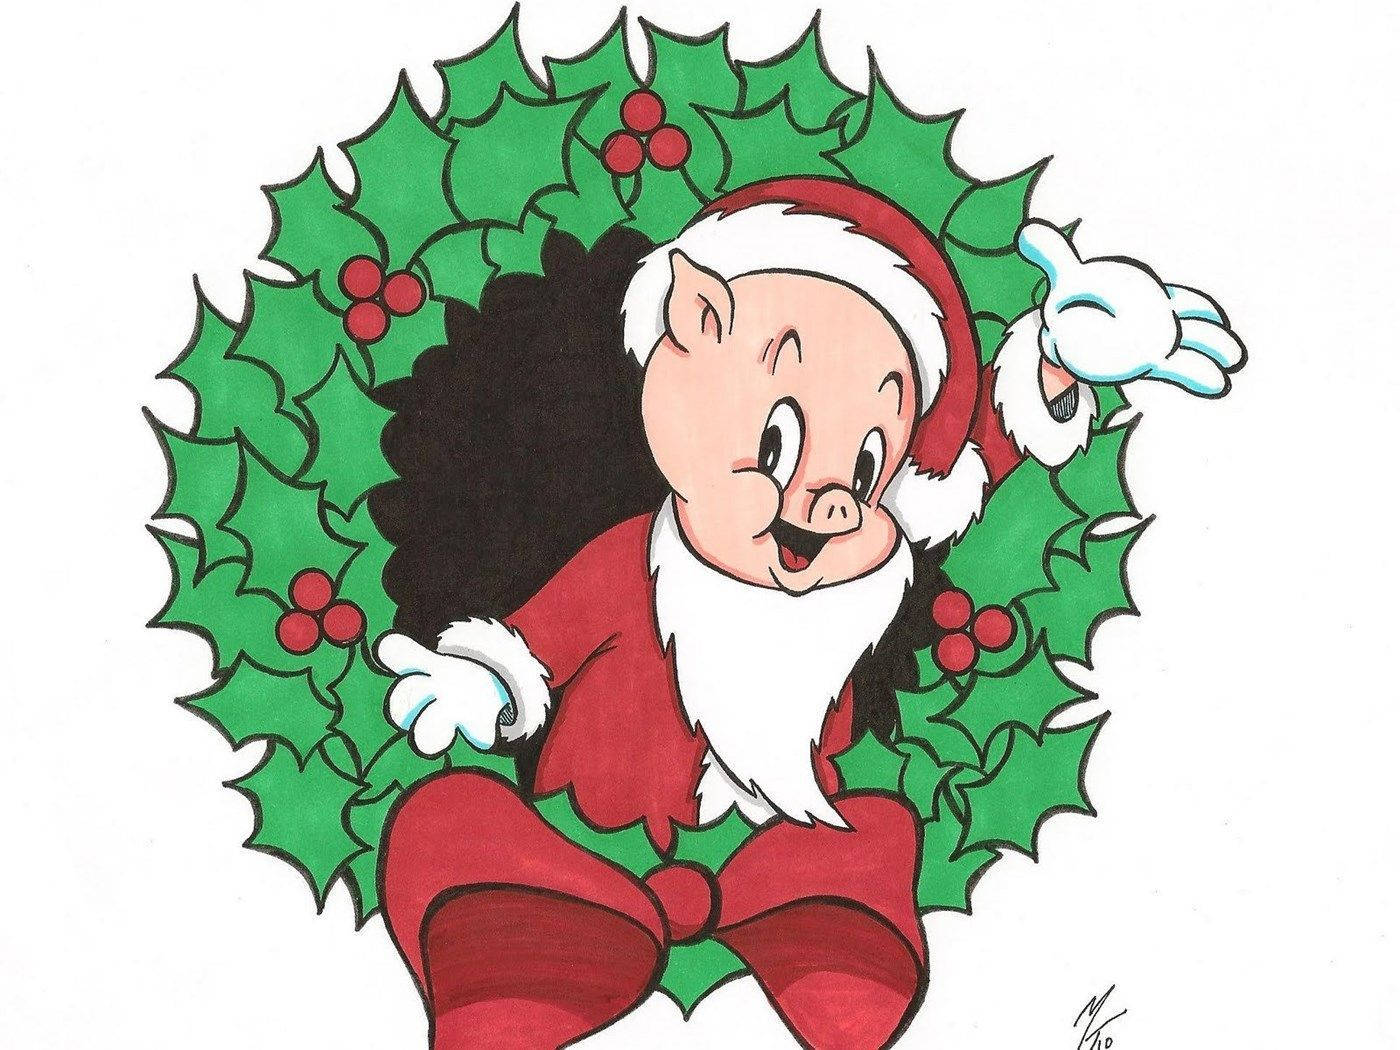 Cute Porky Pig cartoon character dresses as Santa Claus in the middle of the green Christmas mistletoe